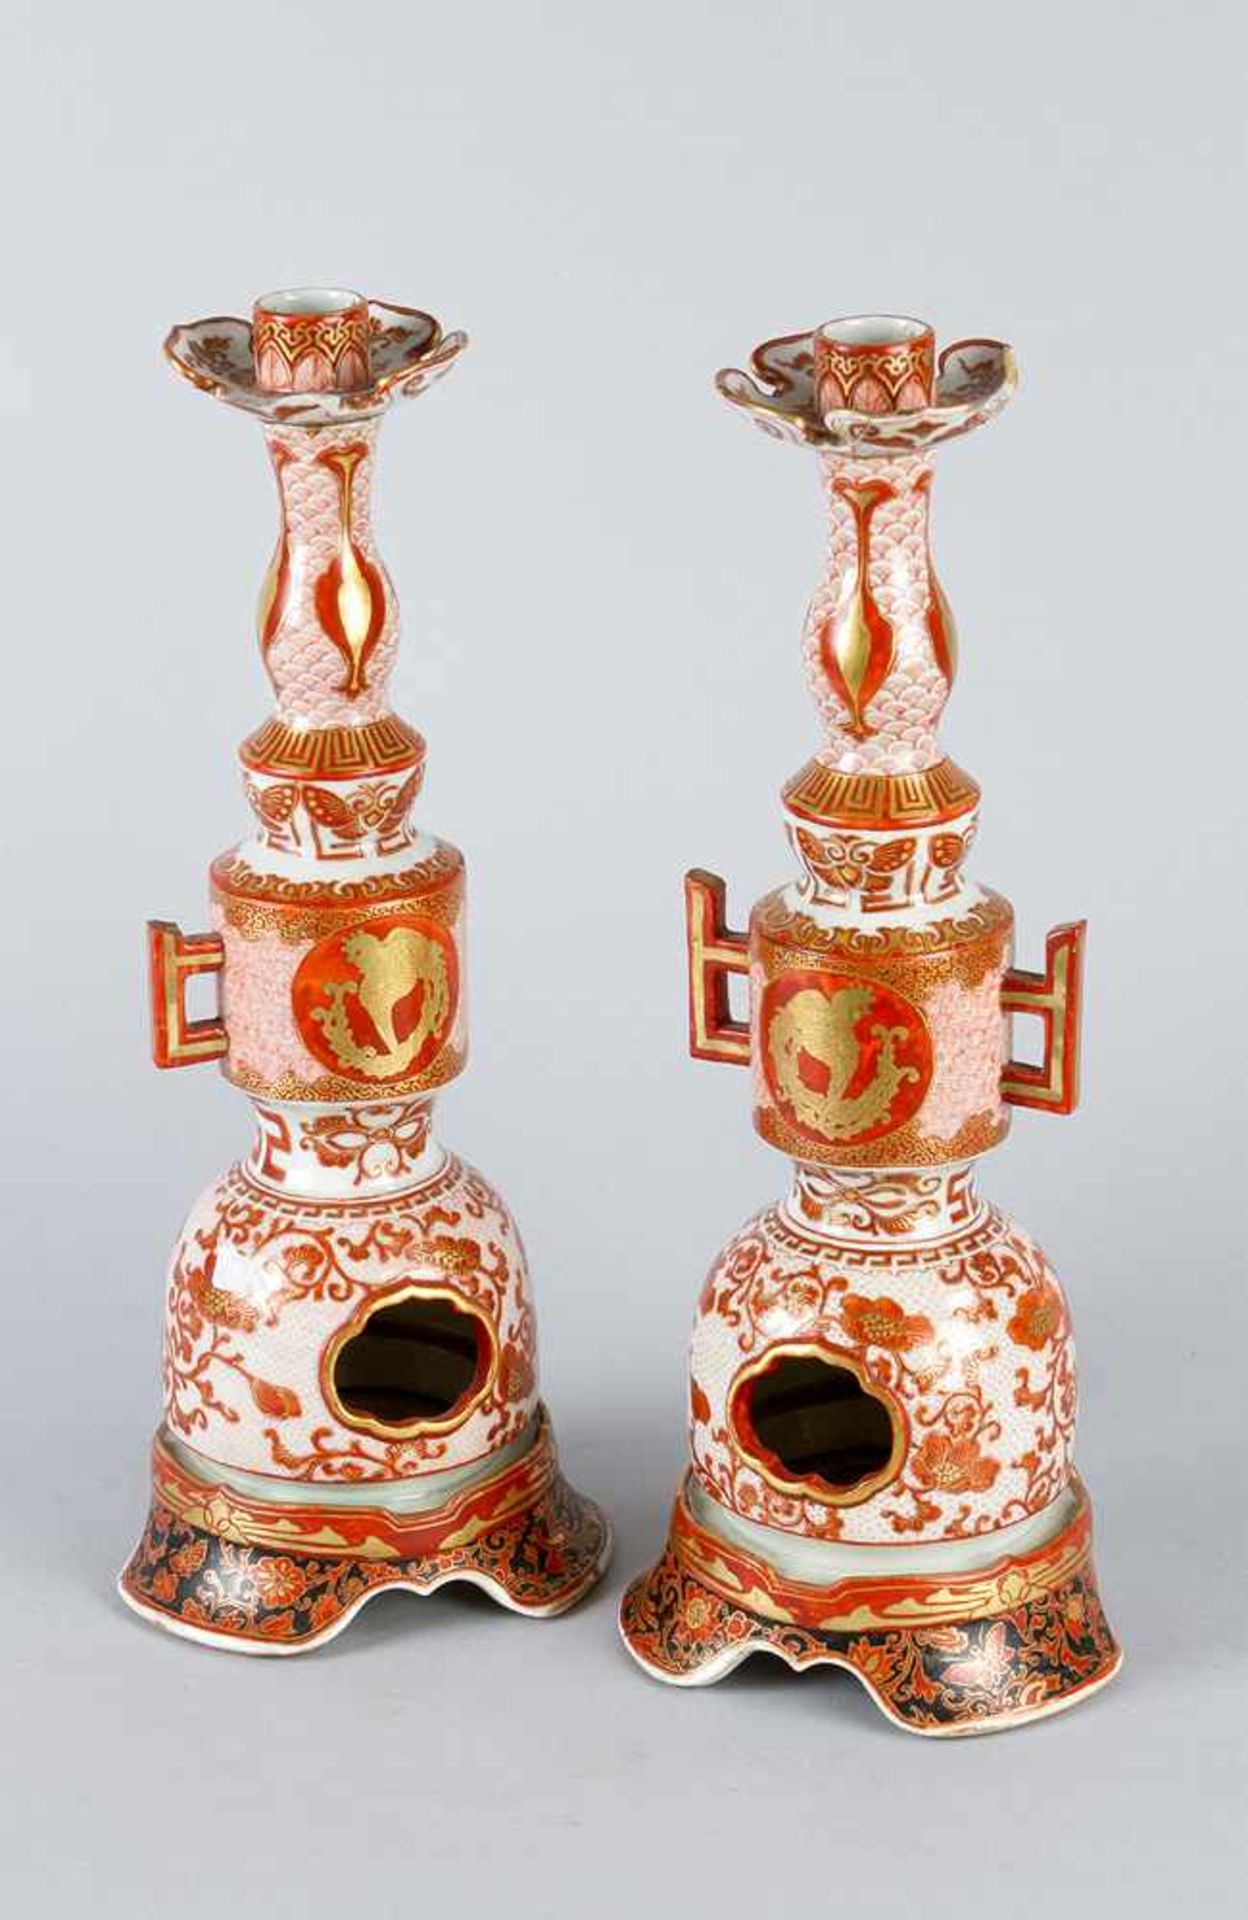 Pair of Imari Candle Sticks, porcelain, each with spout and handgrips, open work, round bowed